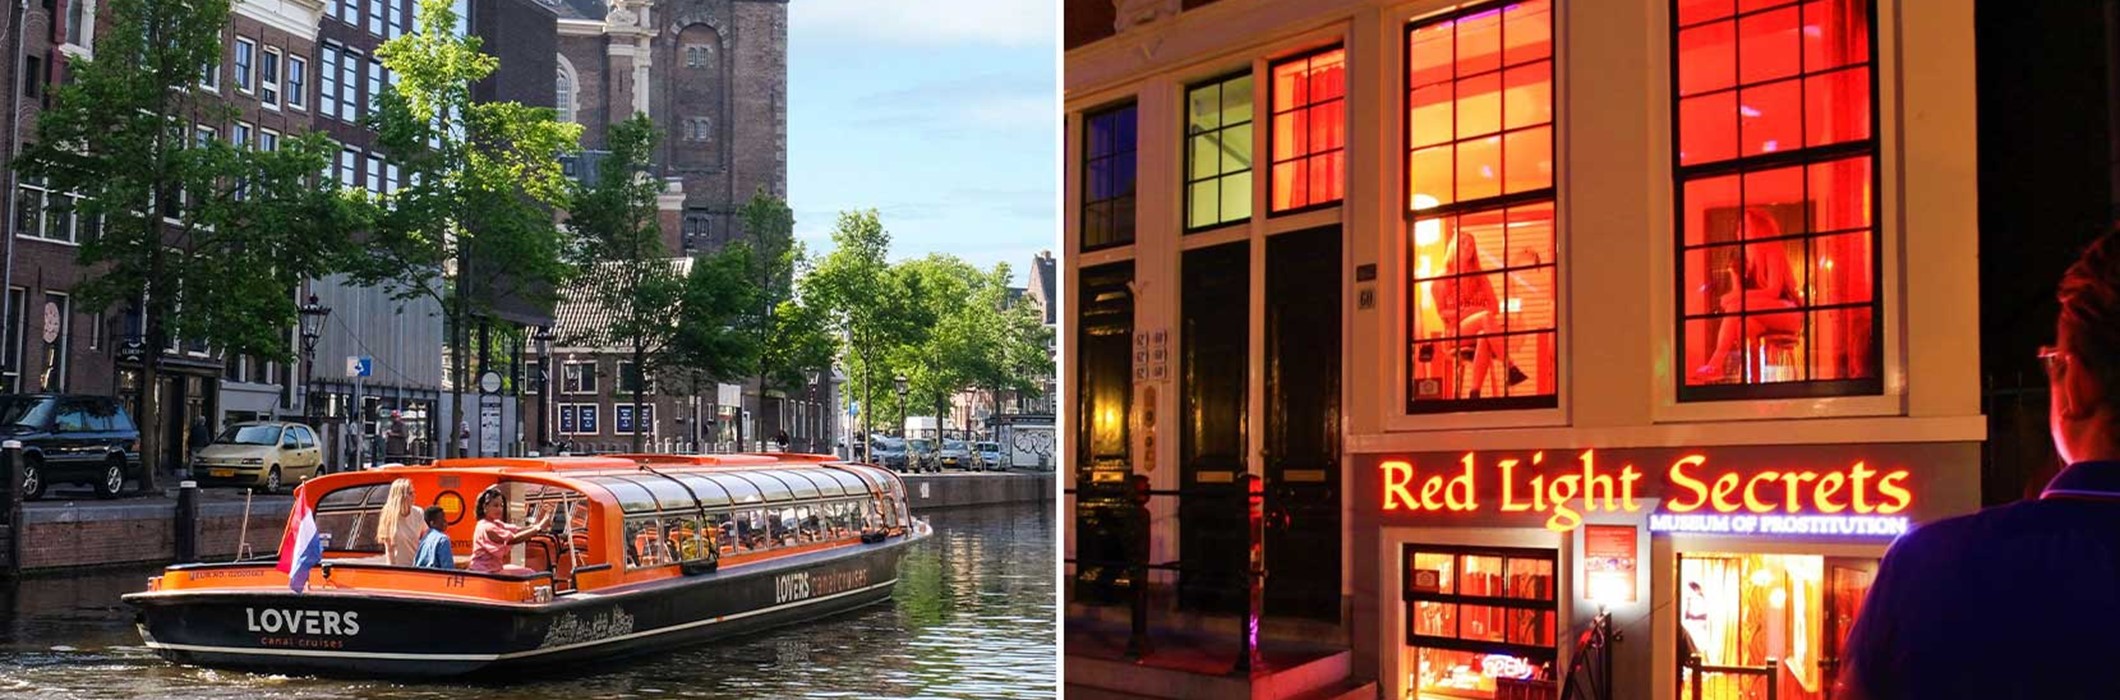 Red Light Secrets + Amsterdam Canal Cruise